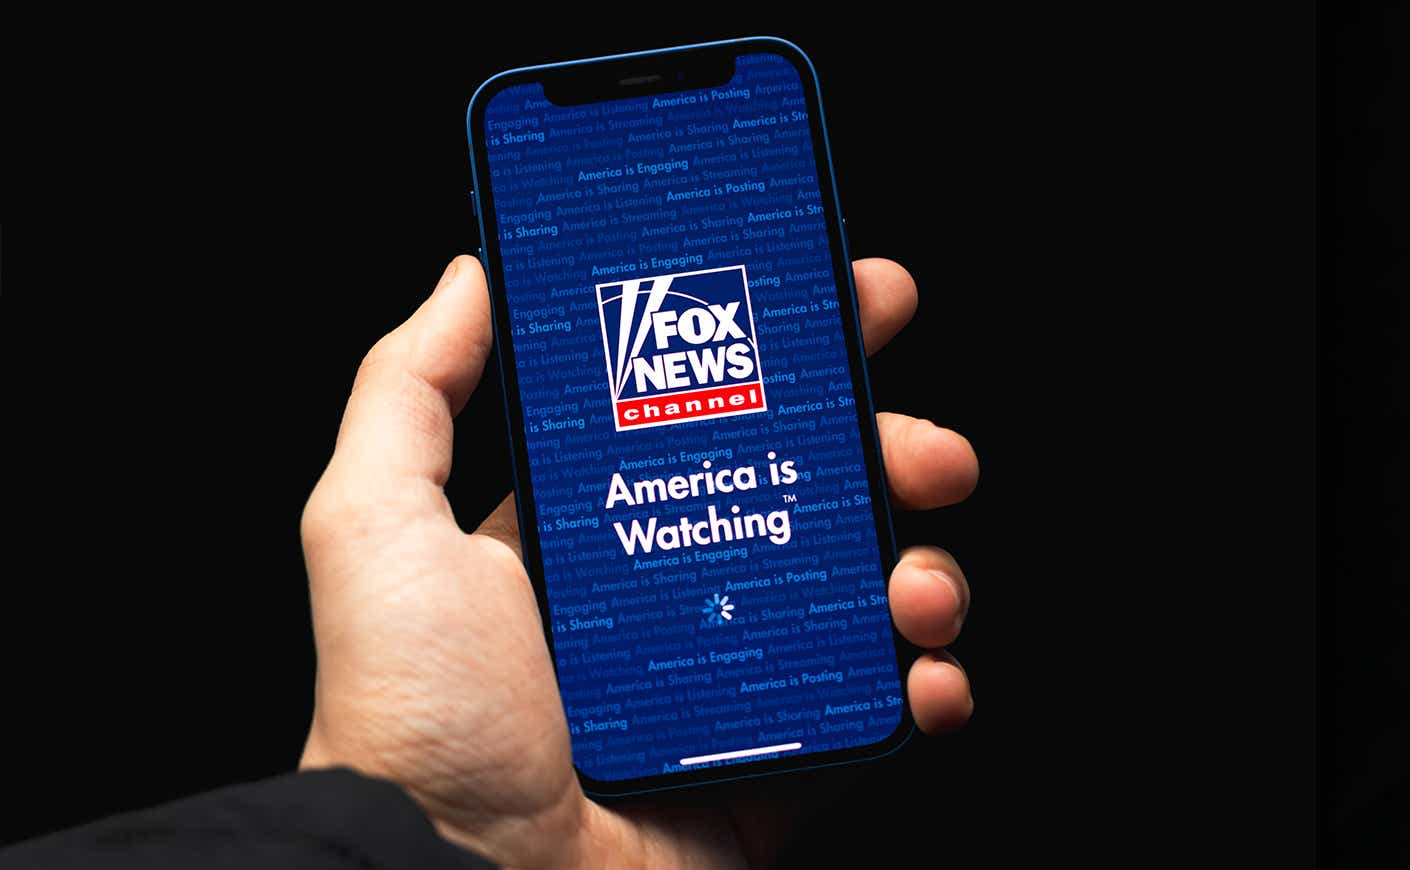 Hand holding phone with Fox News pulled up